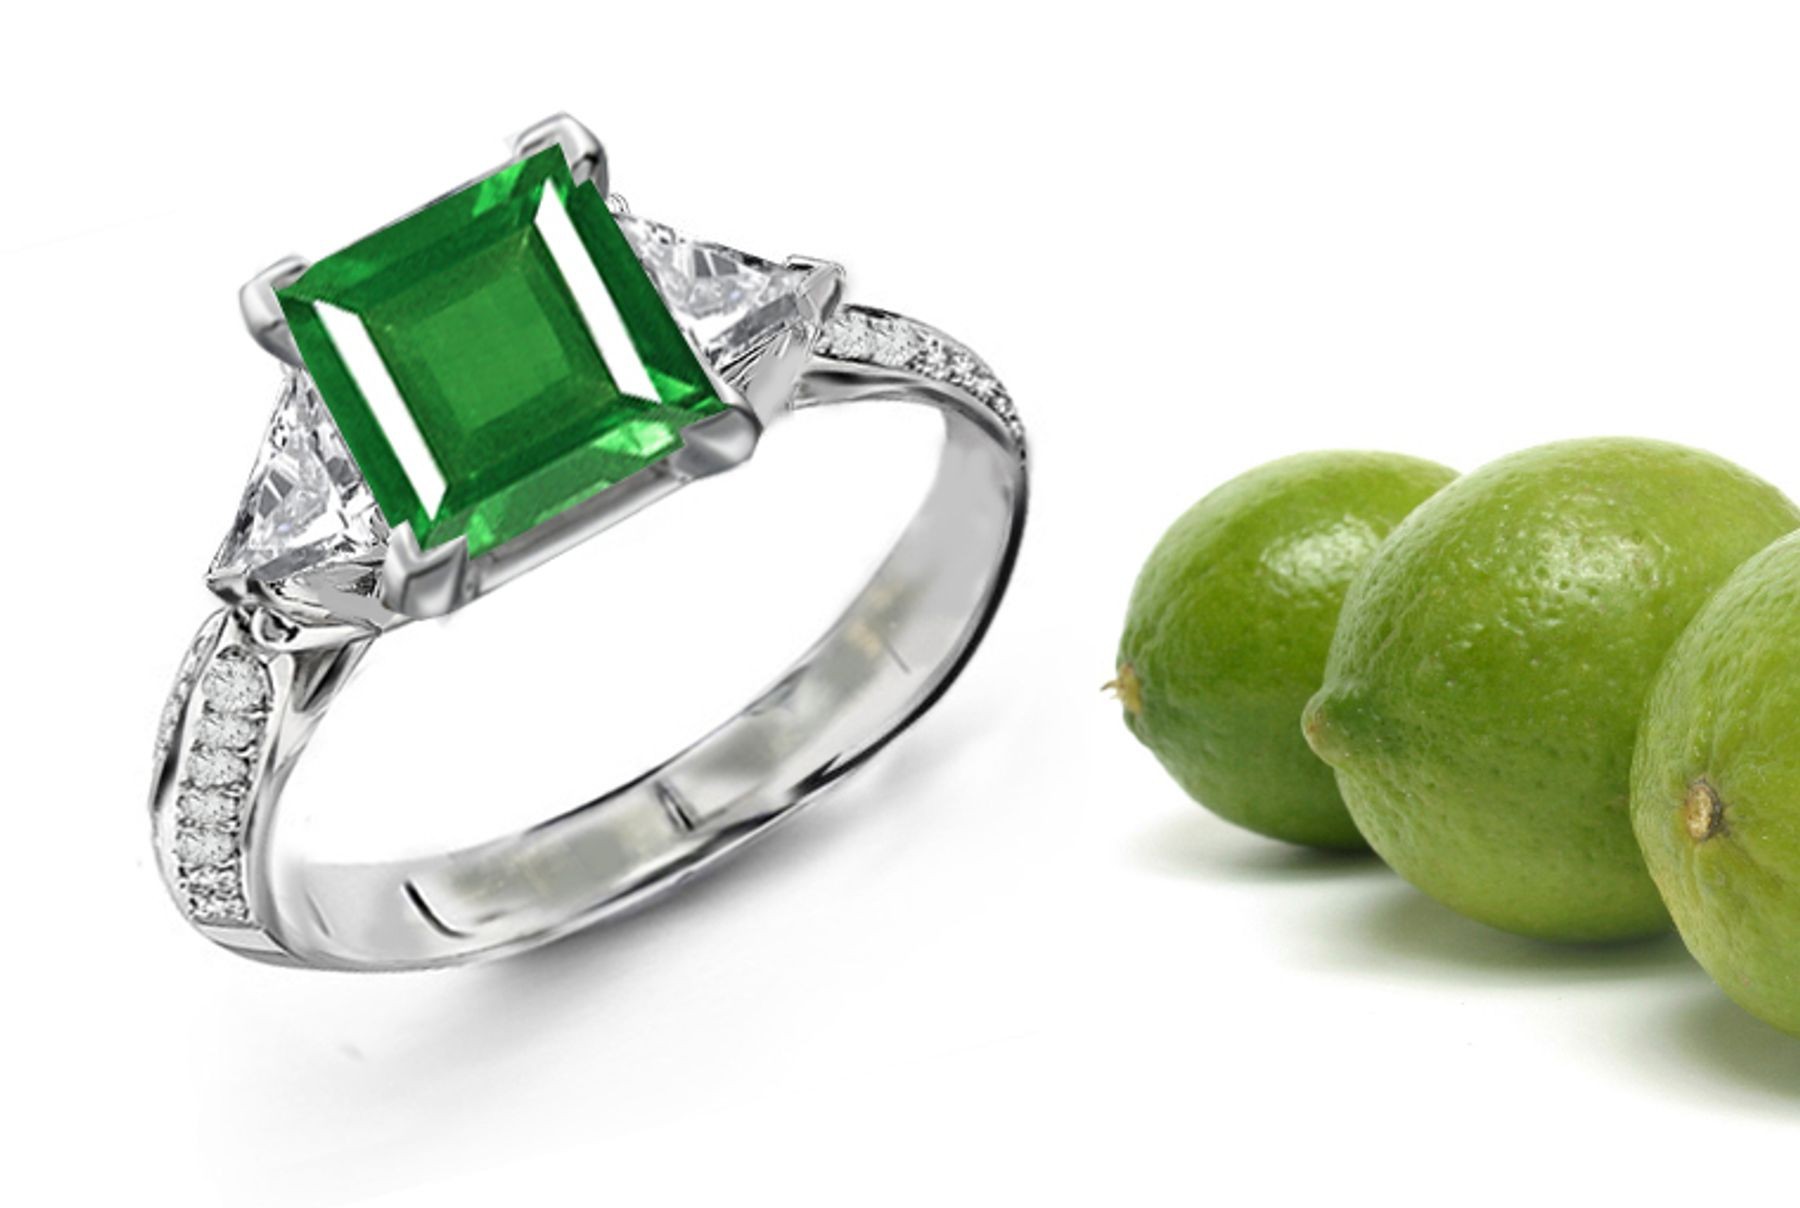 Stylistic Compositions: This Ring Features 3 Stone Trillion Diamond & Square Emerald in a Stylish Arranged Stucture